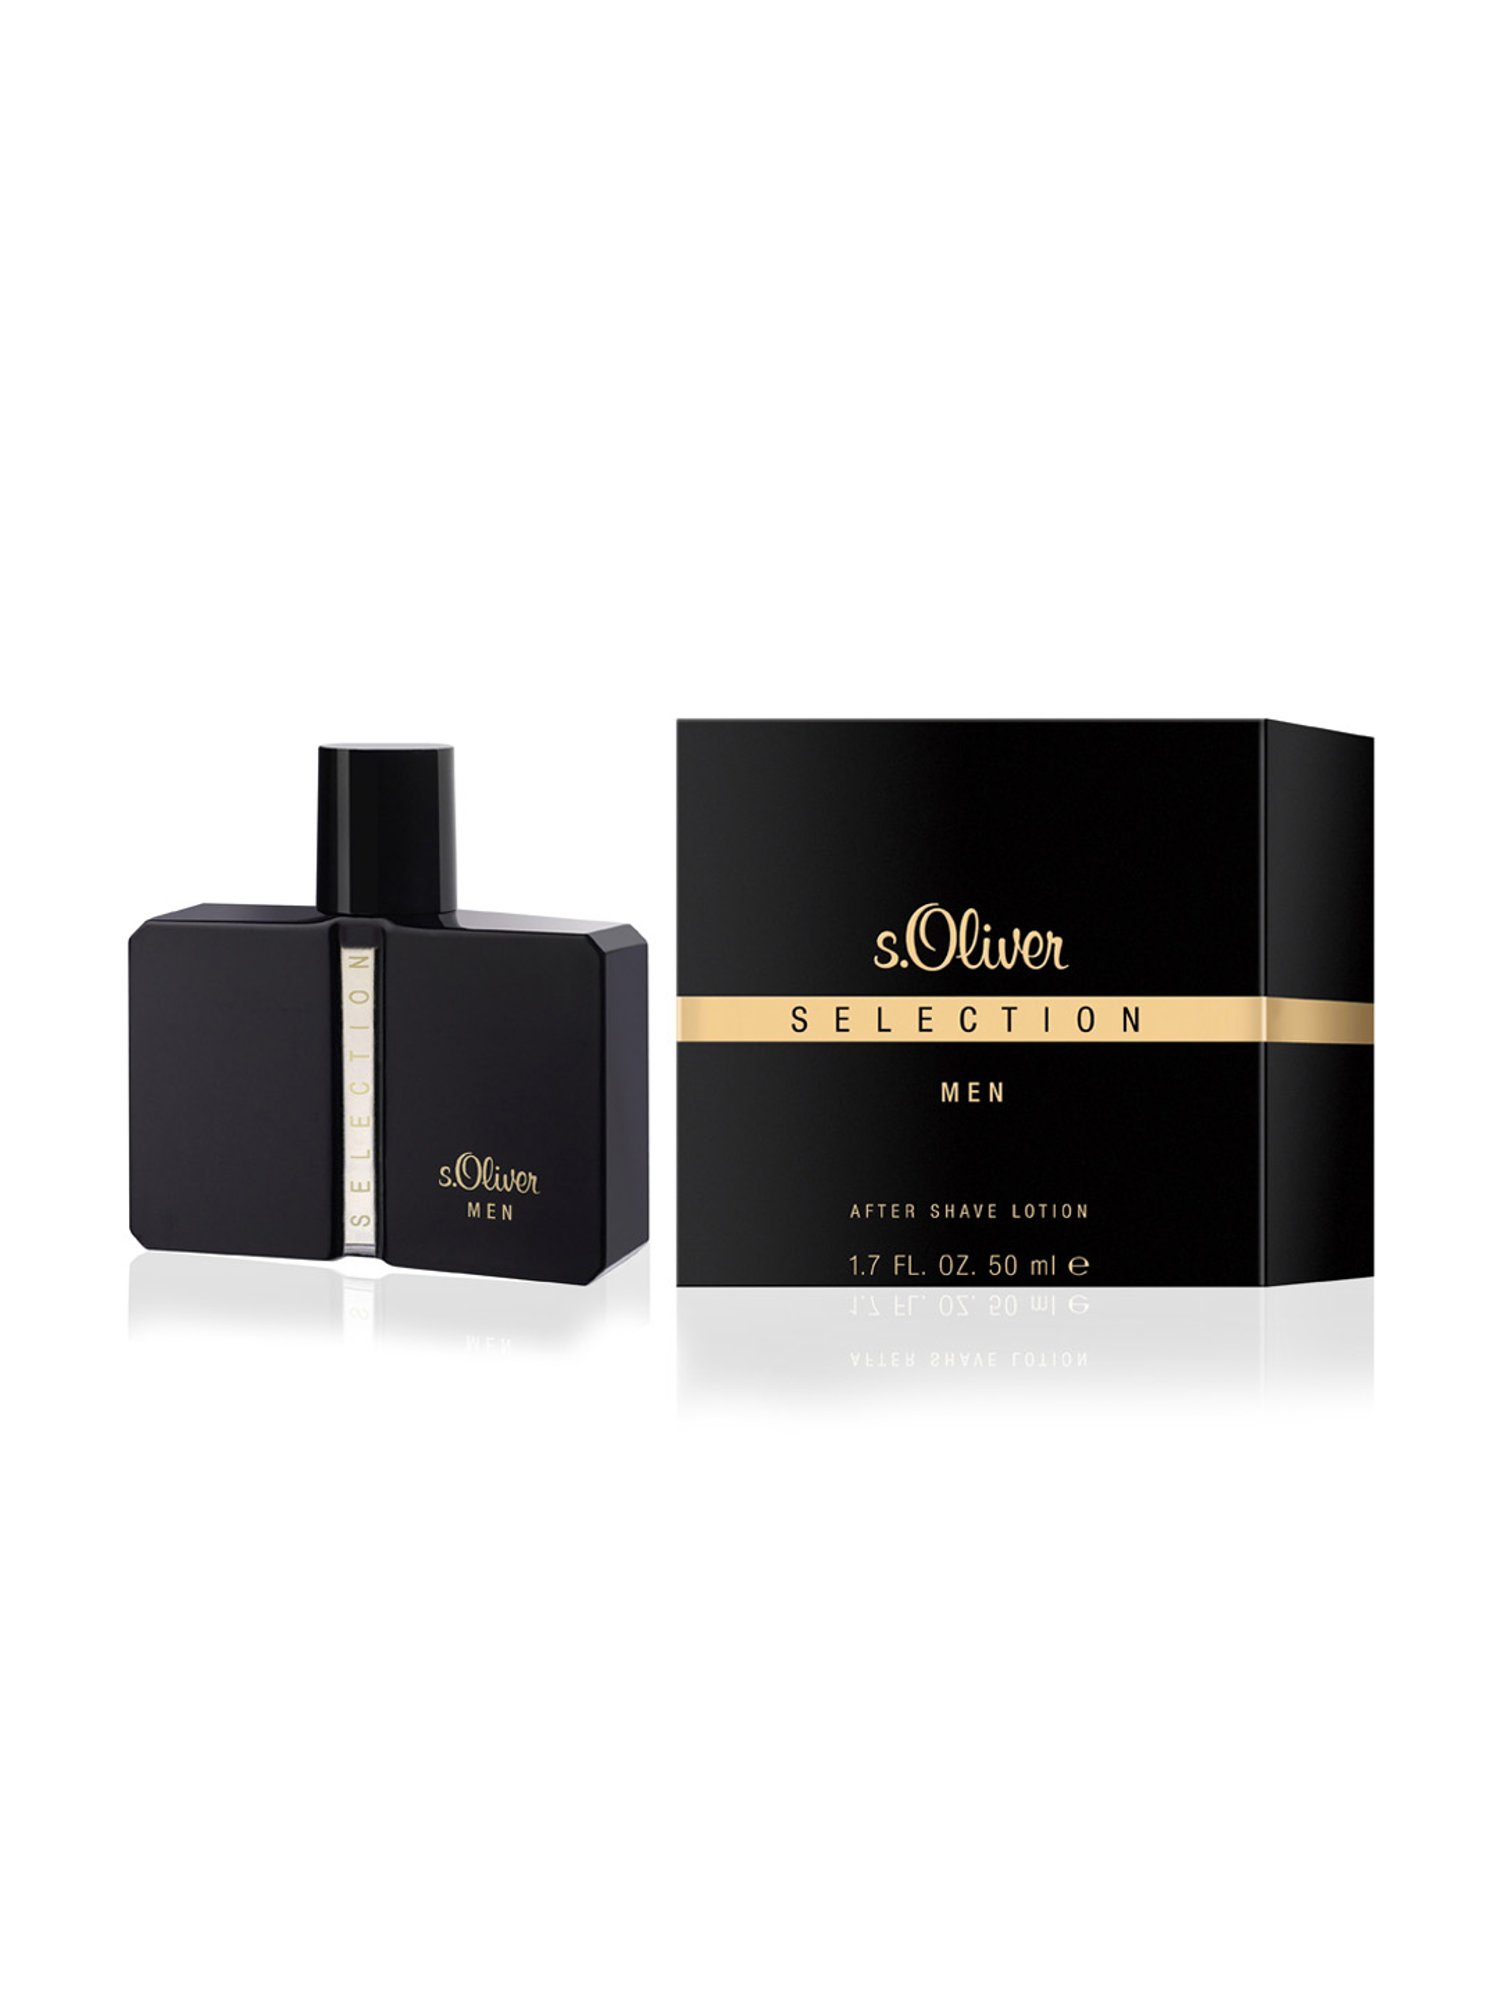 s.Oliver Selection for Woman s.Oliver perfume - a fragrance for